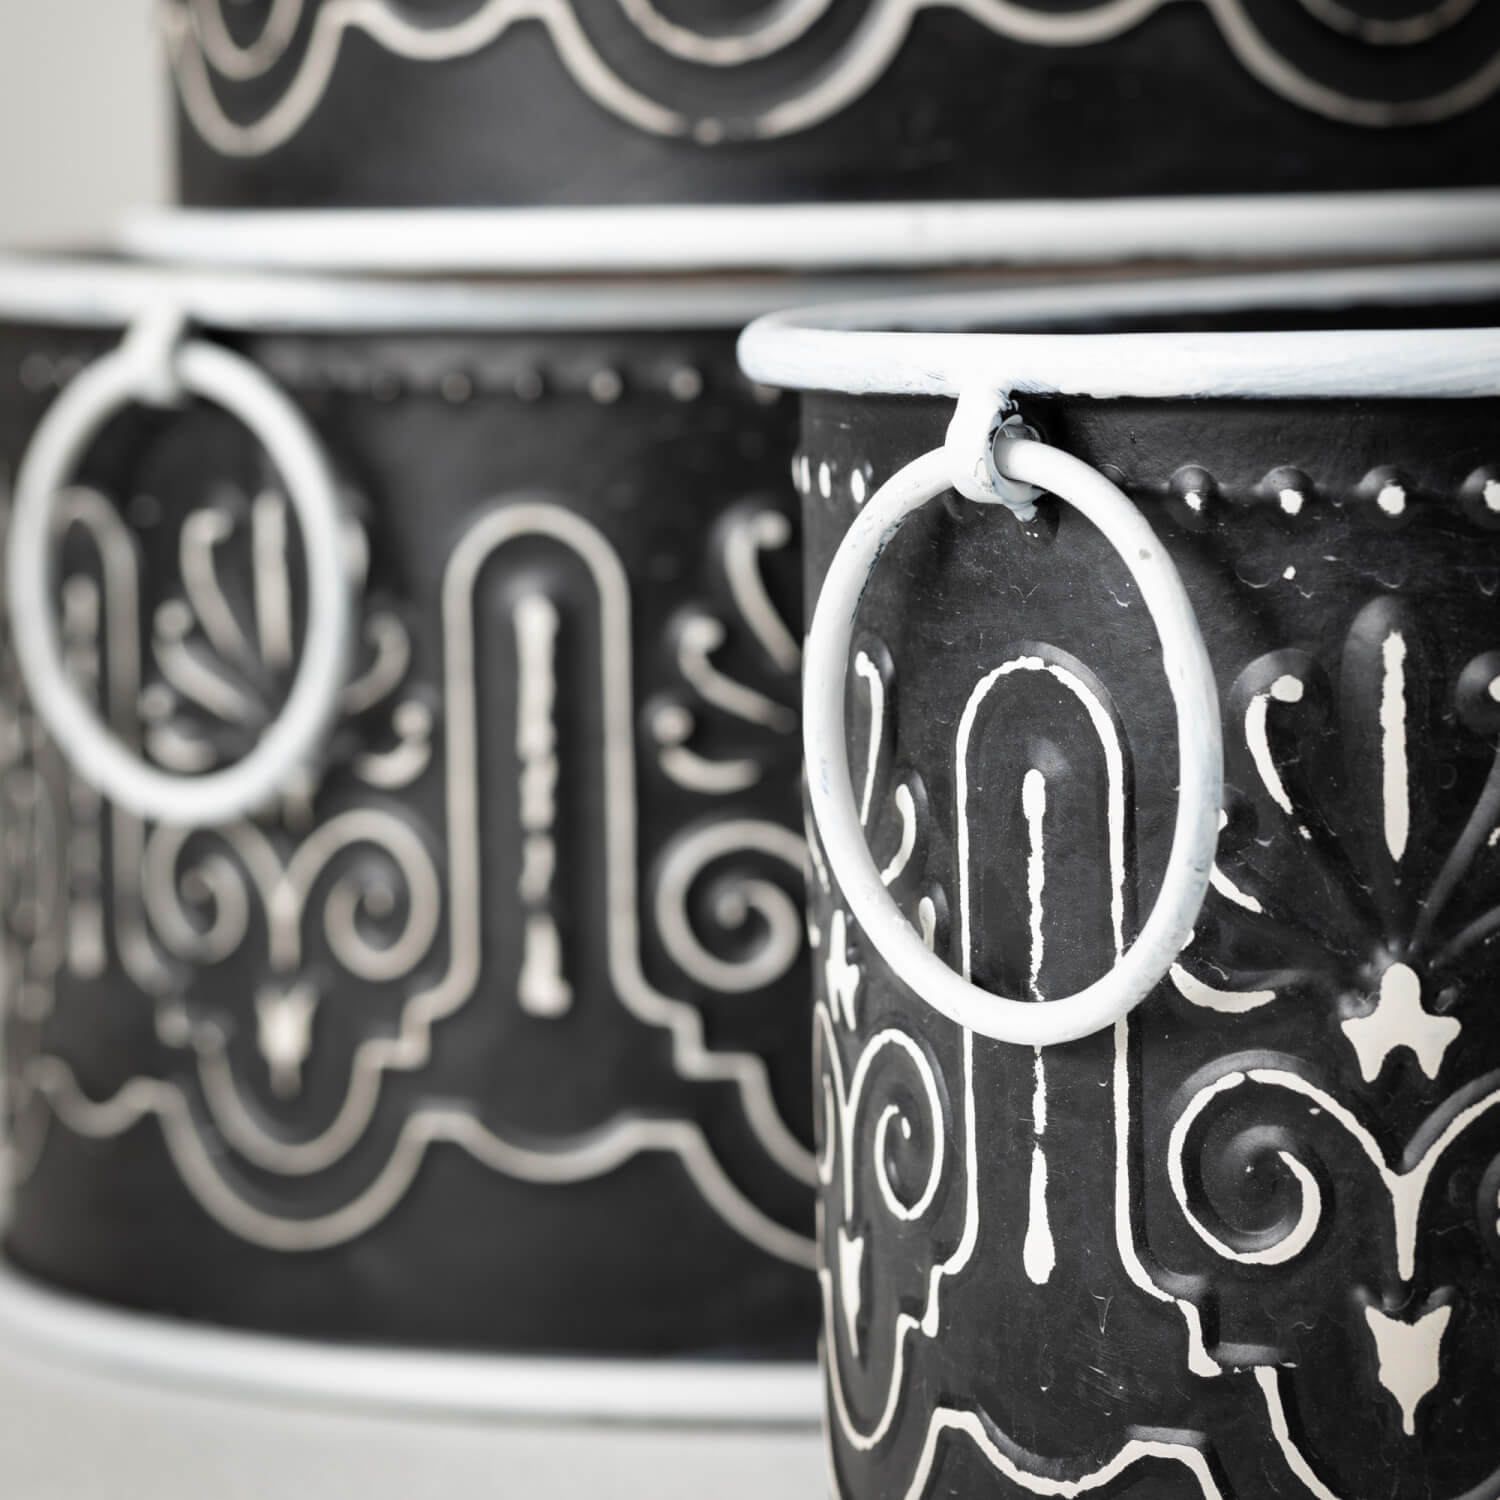 close-up of bucket design and ring handles.